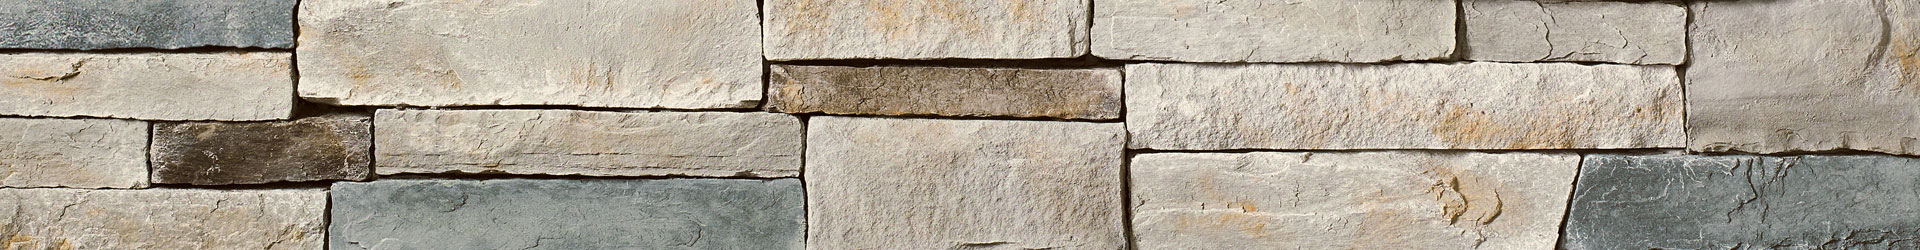 Products Offered by Canadian Stone Industries- Brick Veneer, Natural Stone, Manufactured Stone